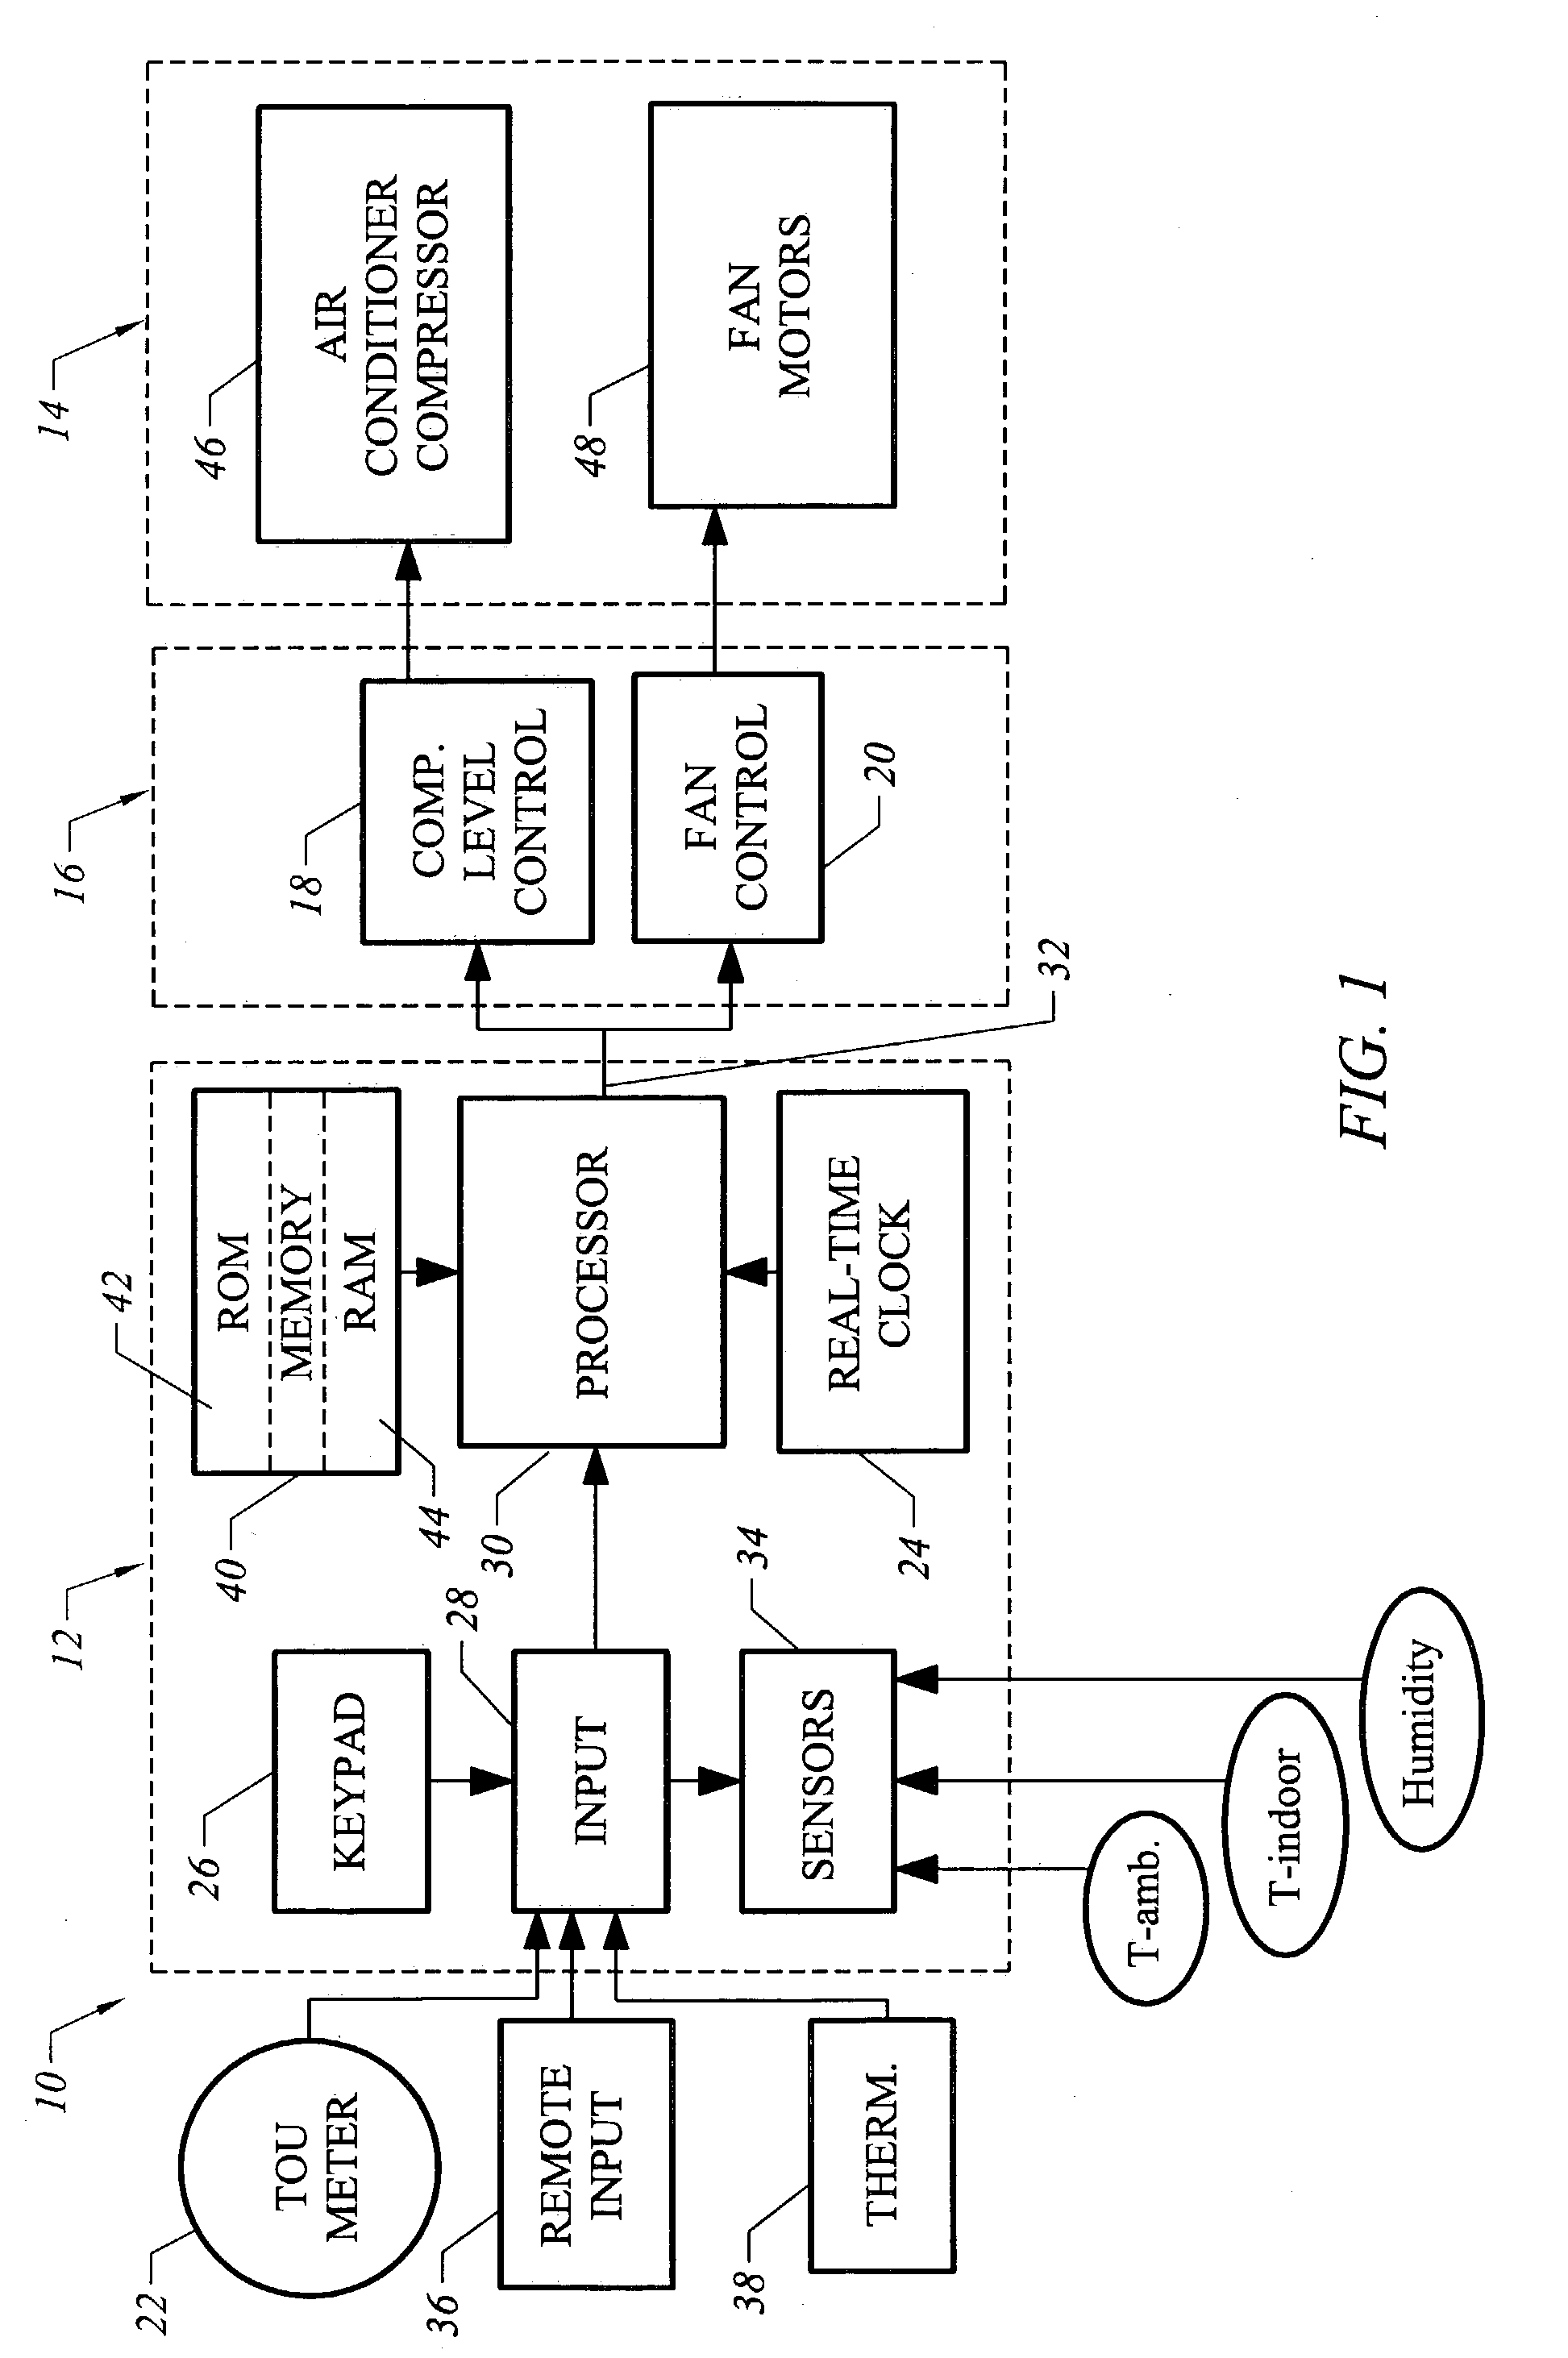 Strategic-response control system for regulating air conditioners for economic operation